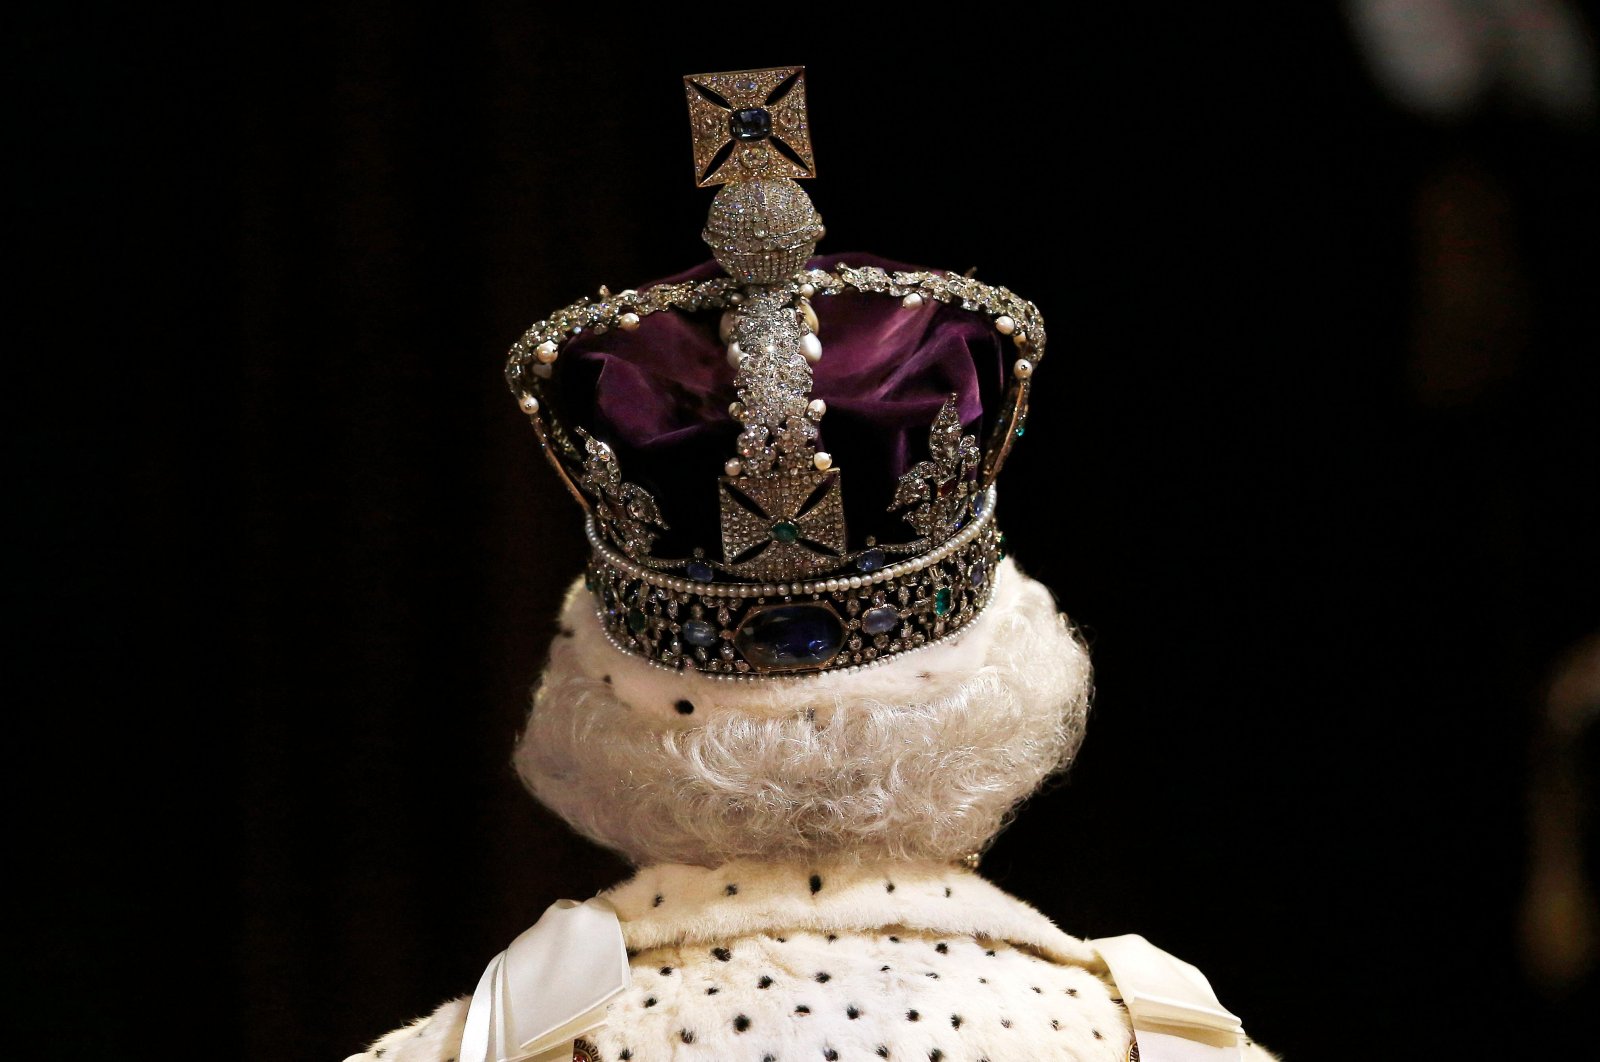 Queen Elizabeth II wearing the Imperial State Crown proceeds through the Royal Gallery as she attends the opening of Parliament in the House of Lords at the Palace of Westminster, London, U.K., May 27, 2015. (AFP Photo)